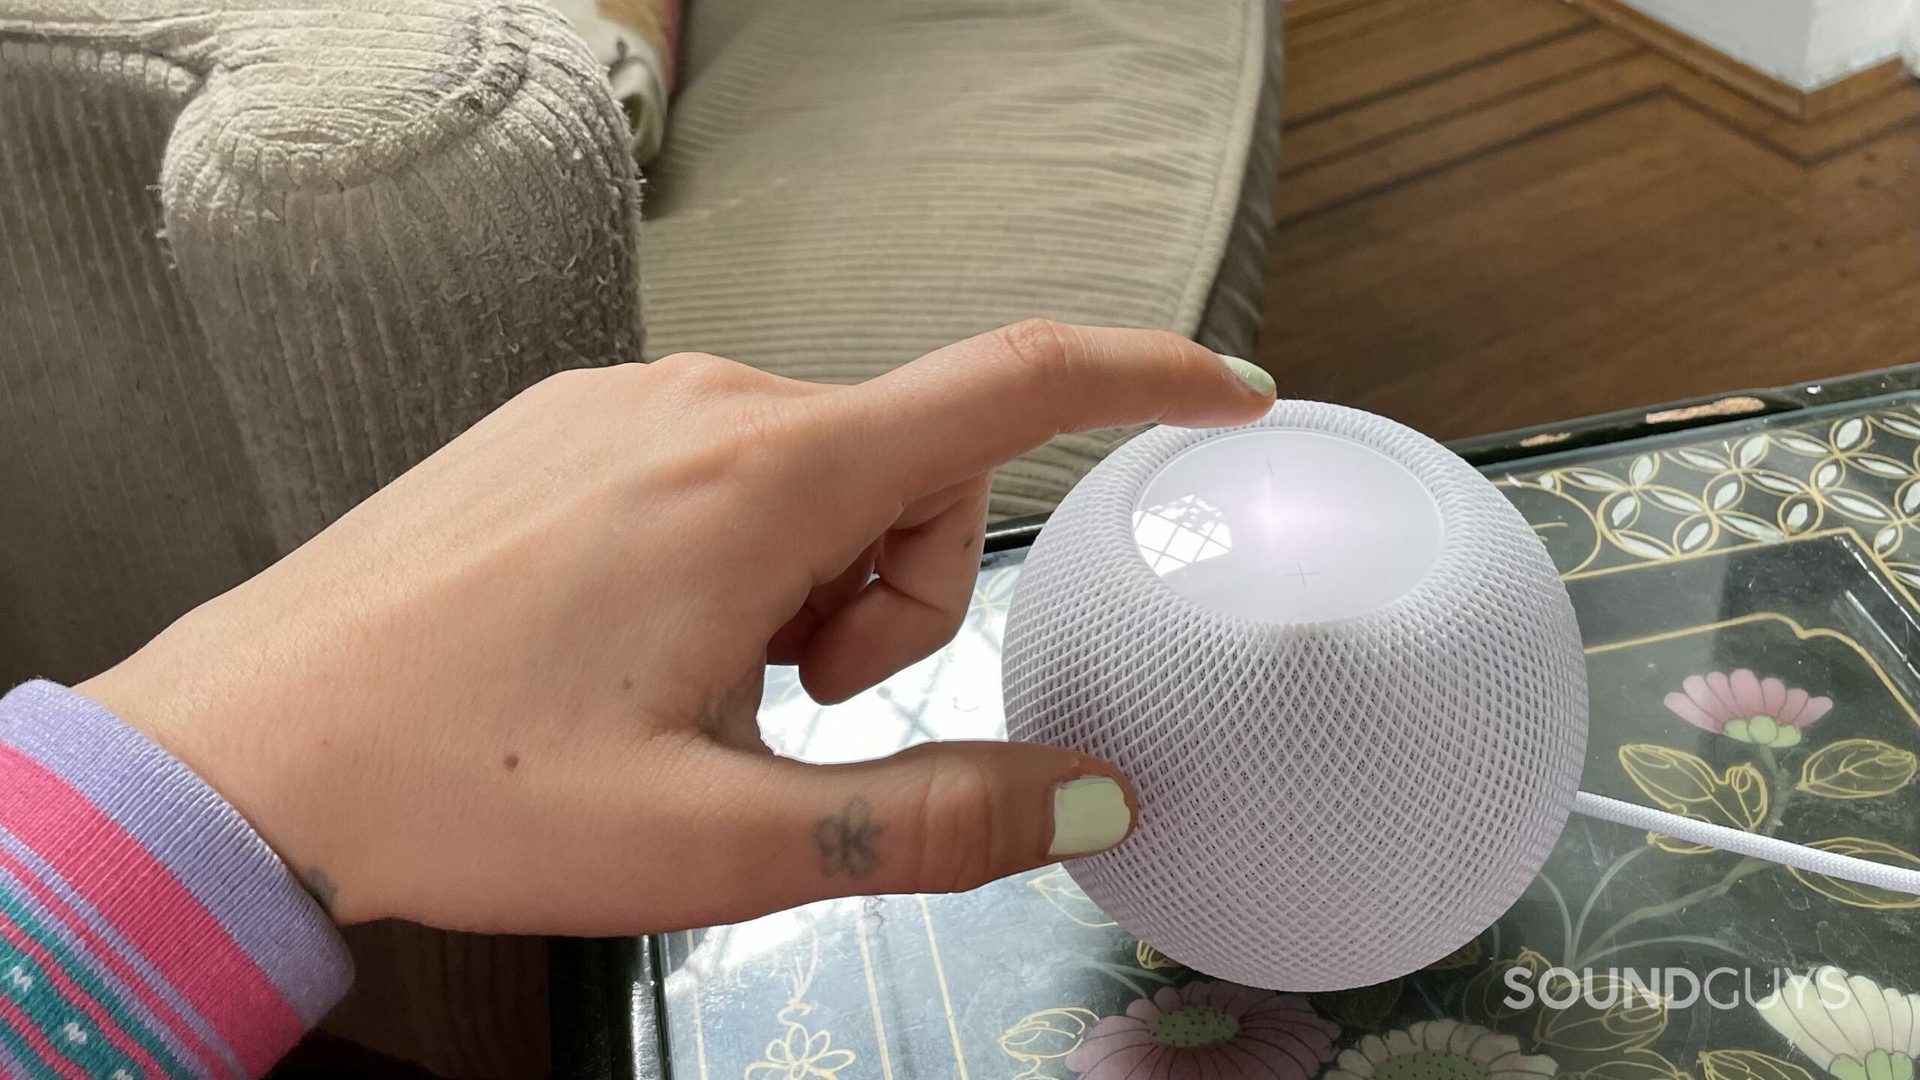 A hand touching the touch pad on a HomePod mini.